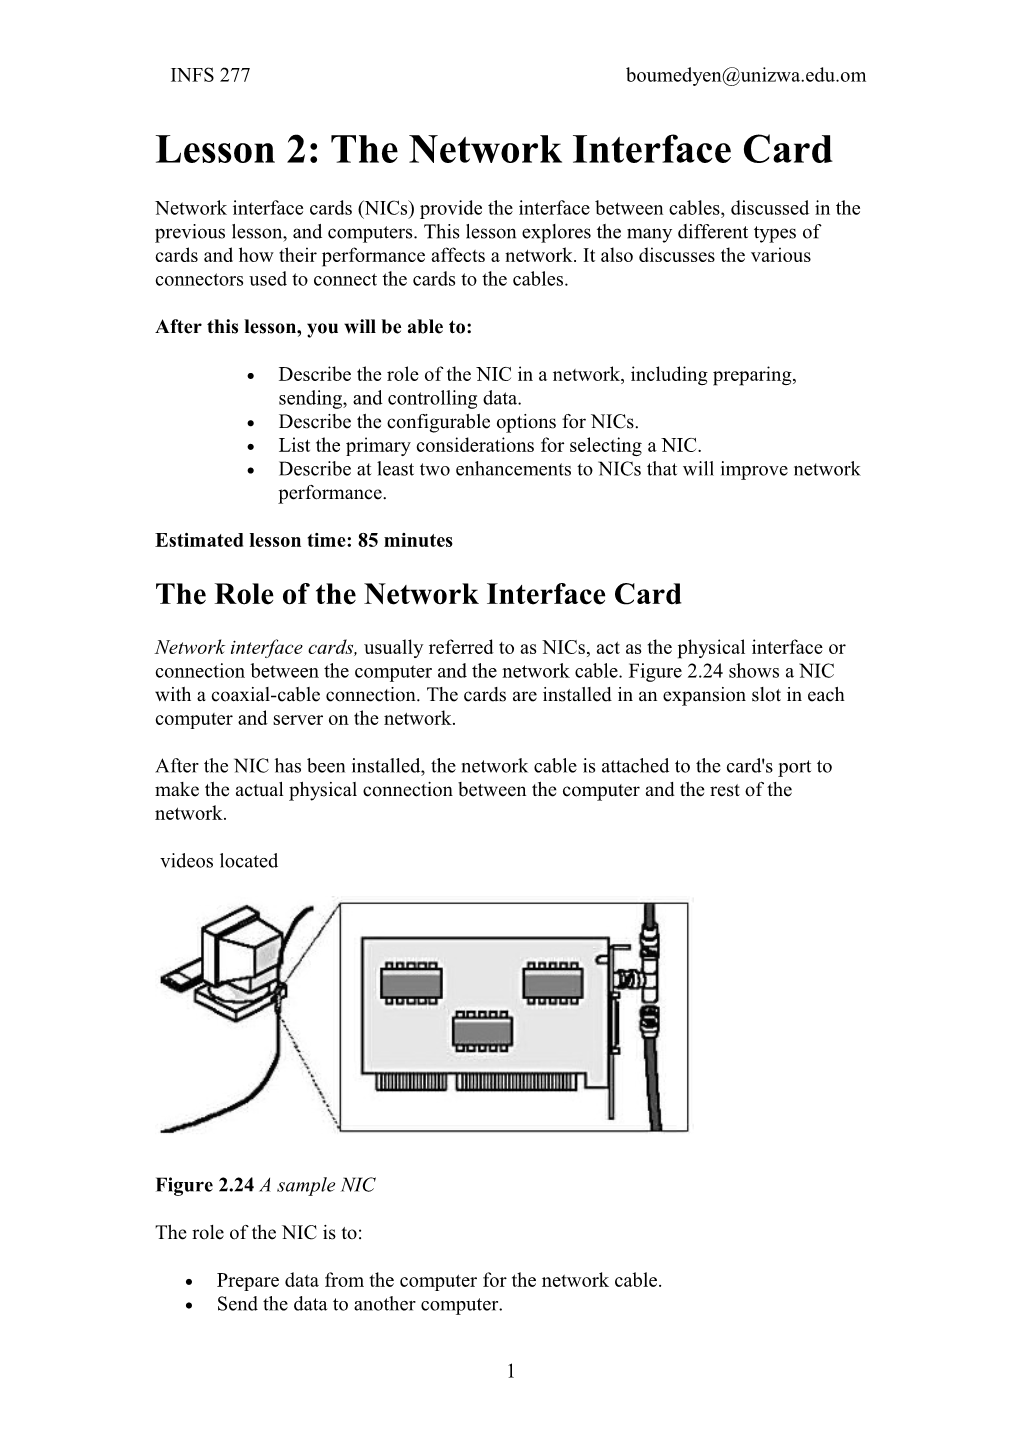 Lesson 2: the Network Interface Card